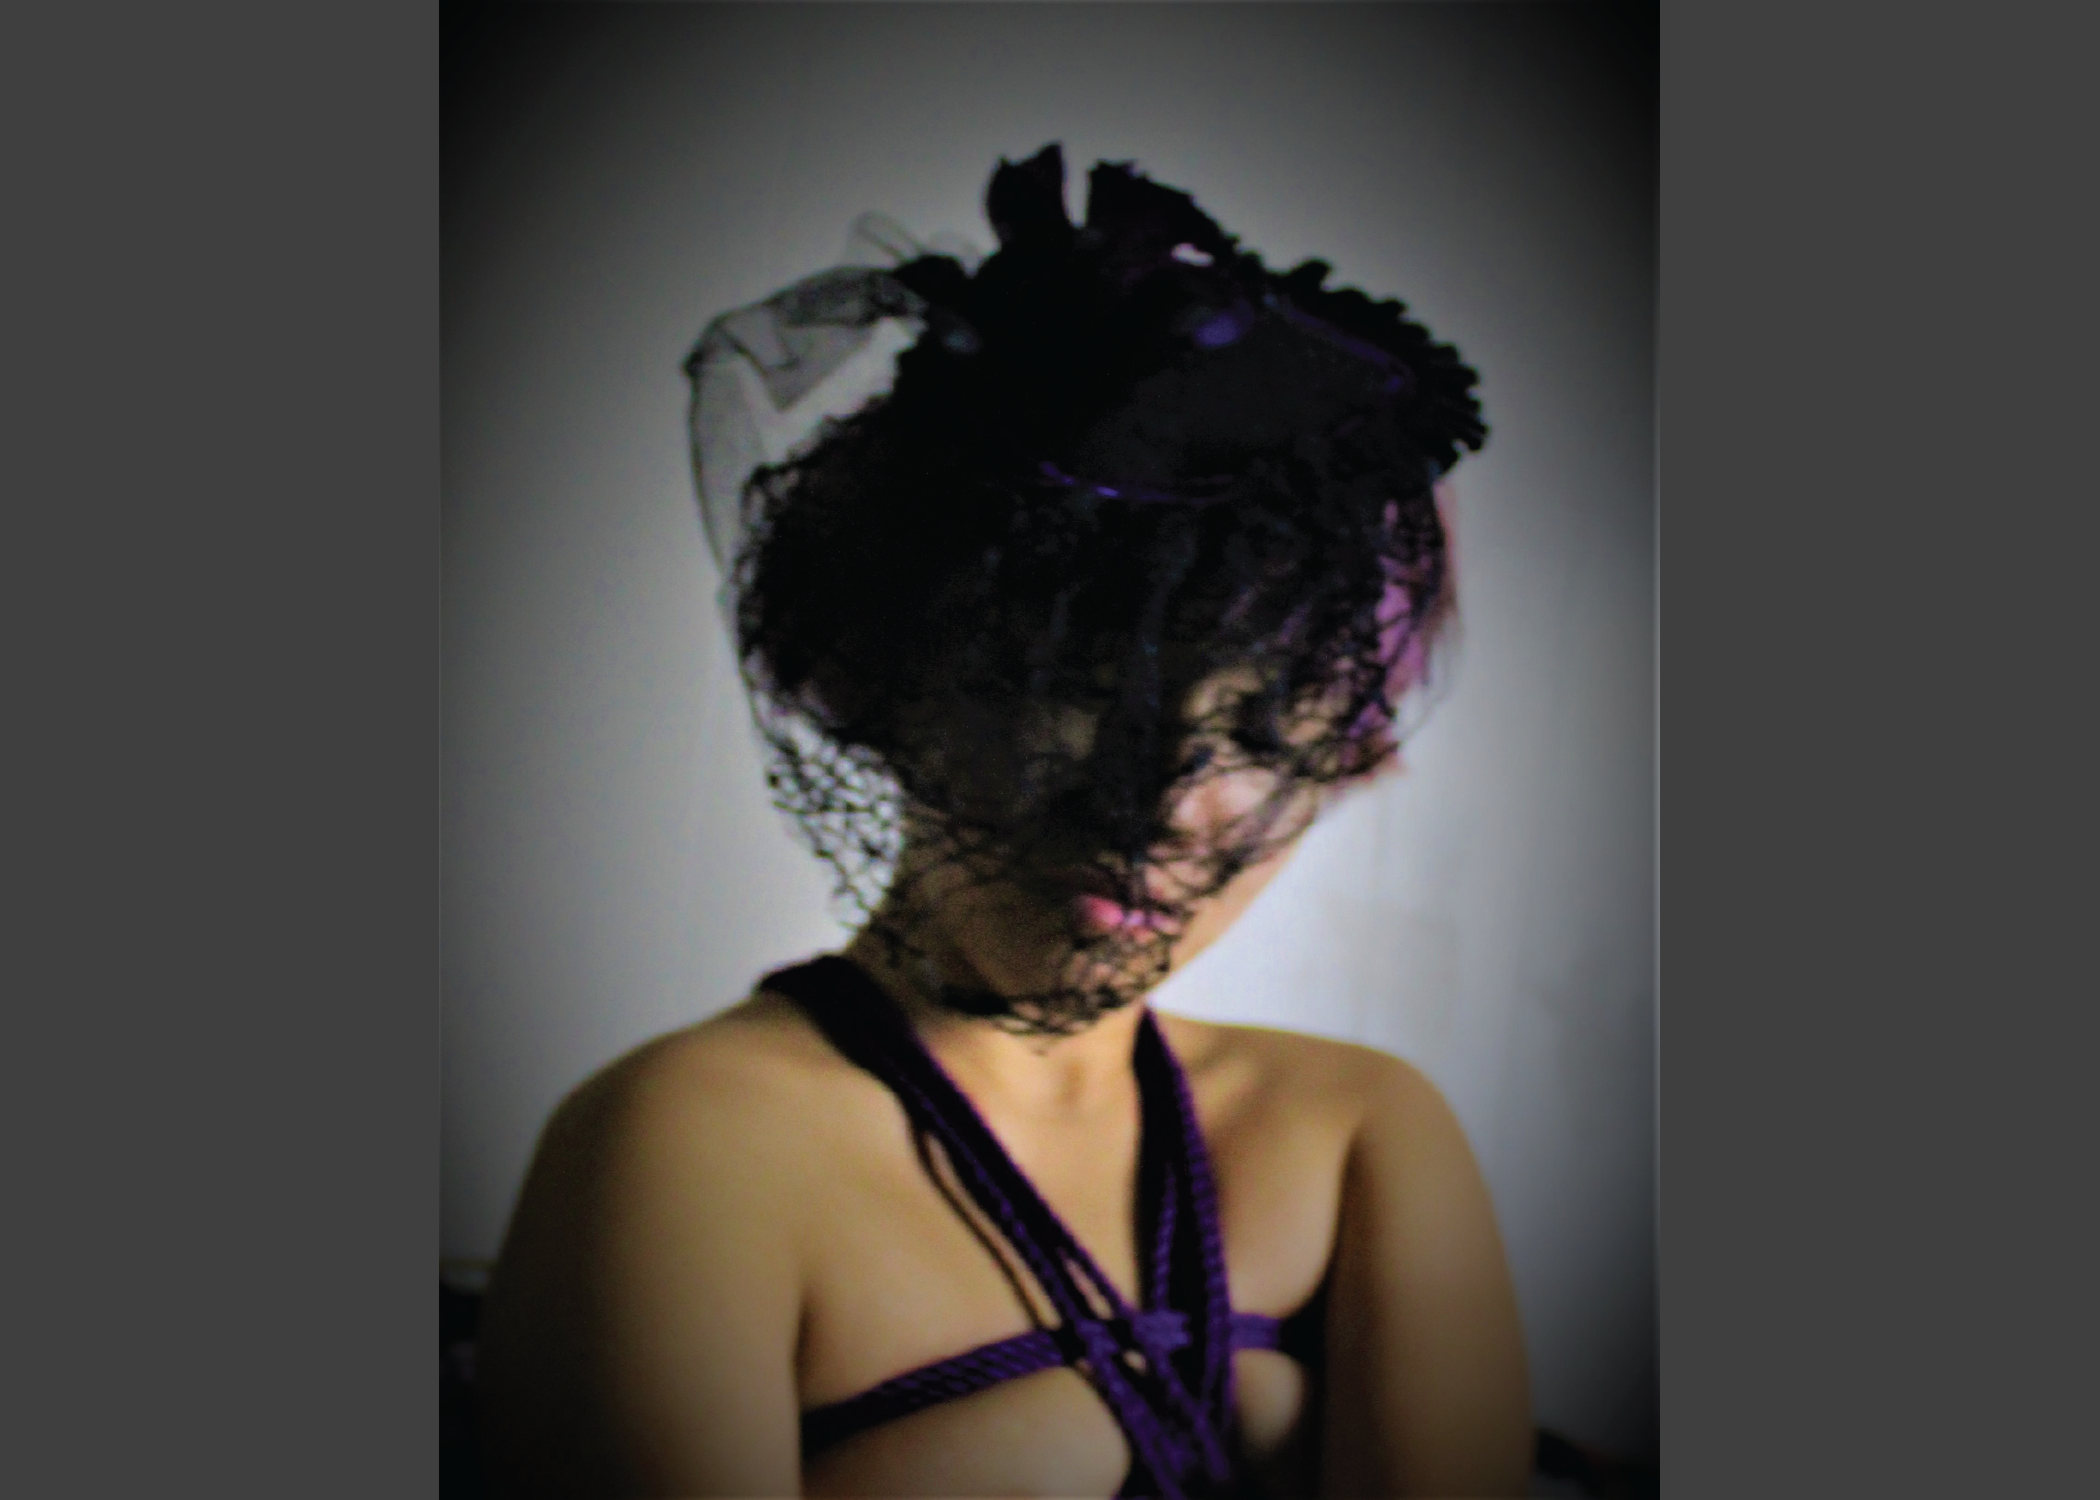 Photo of a Beautiful Woman wearing a birdcage vail hat partially obscuring her face, tanned skin, short light pink hair, bound in a purple rope chest harness, topless.